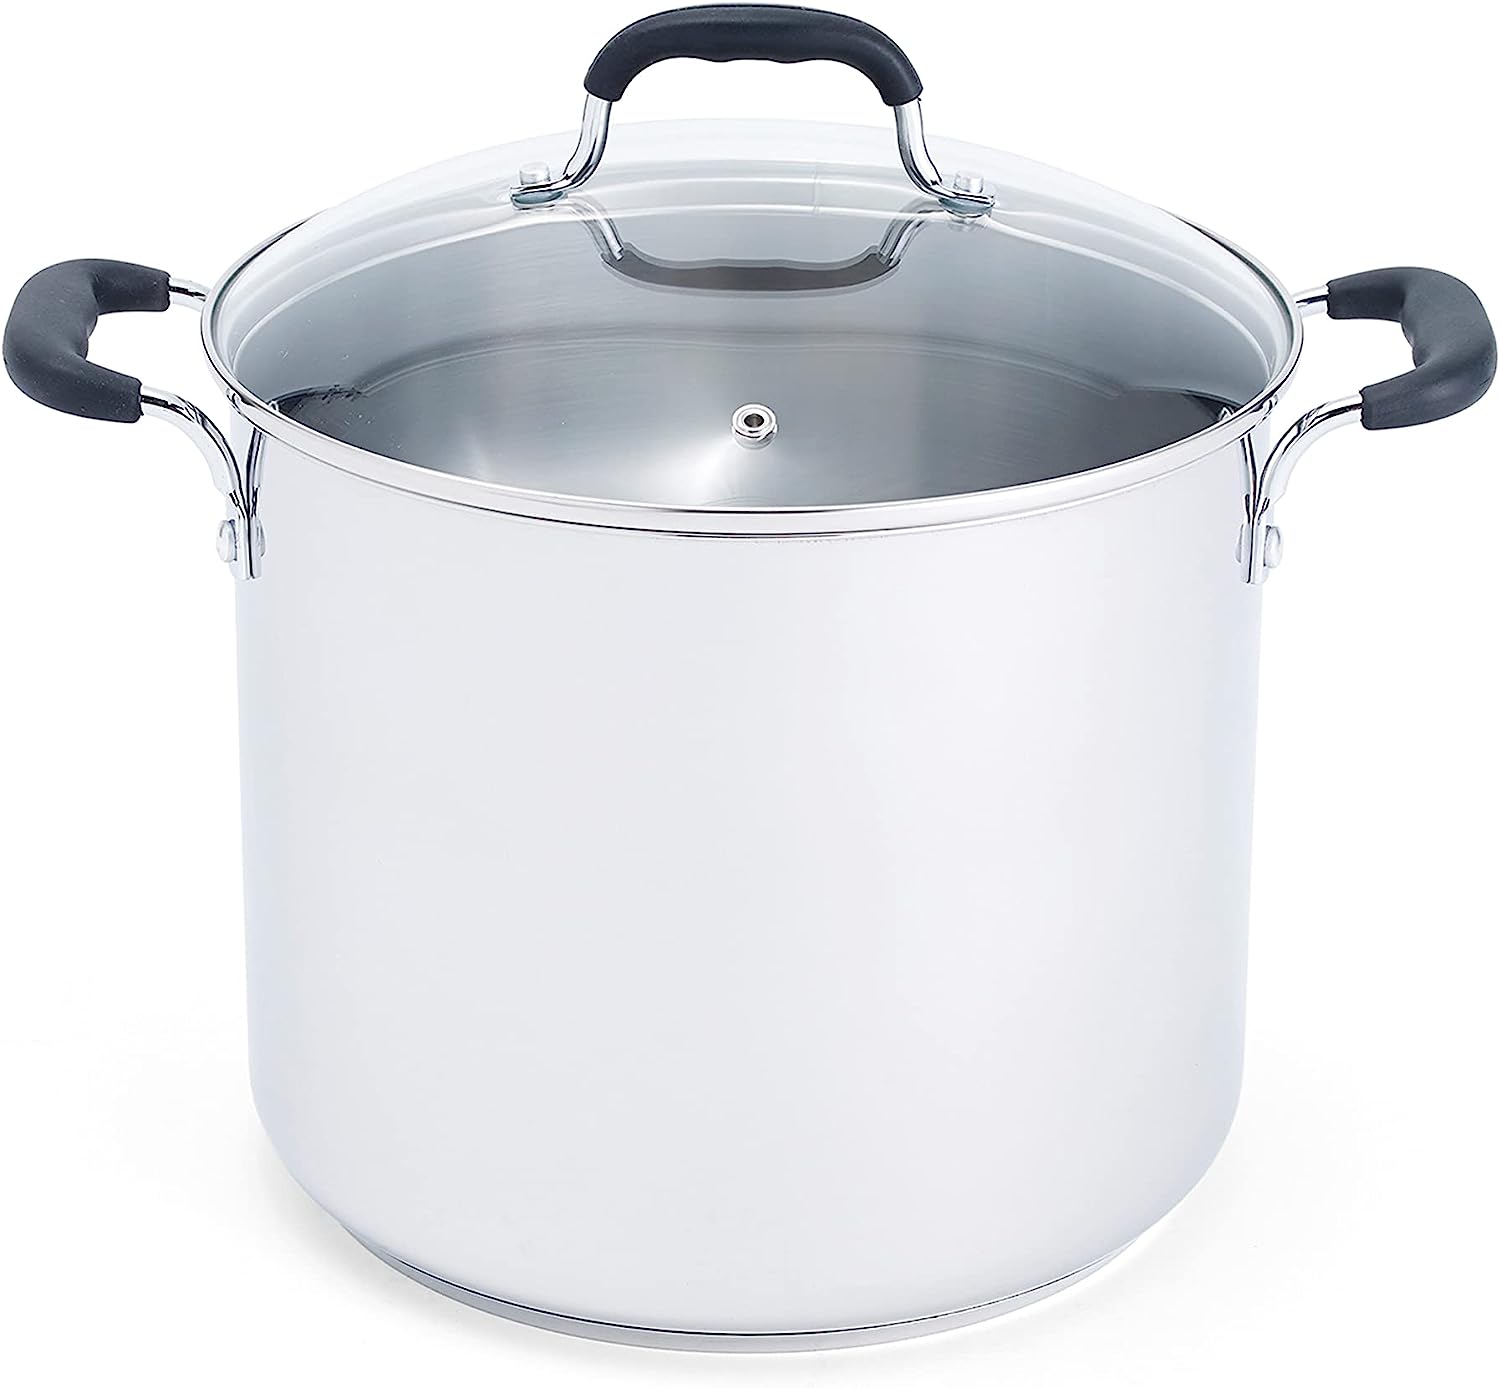 T-fal Specialty Stainless Steel Stockpot 12 Quart Oven Broiler Safe ...